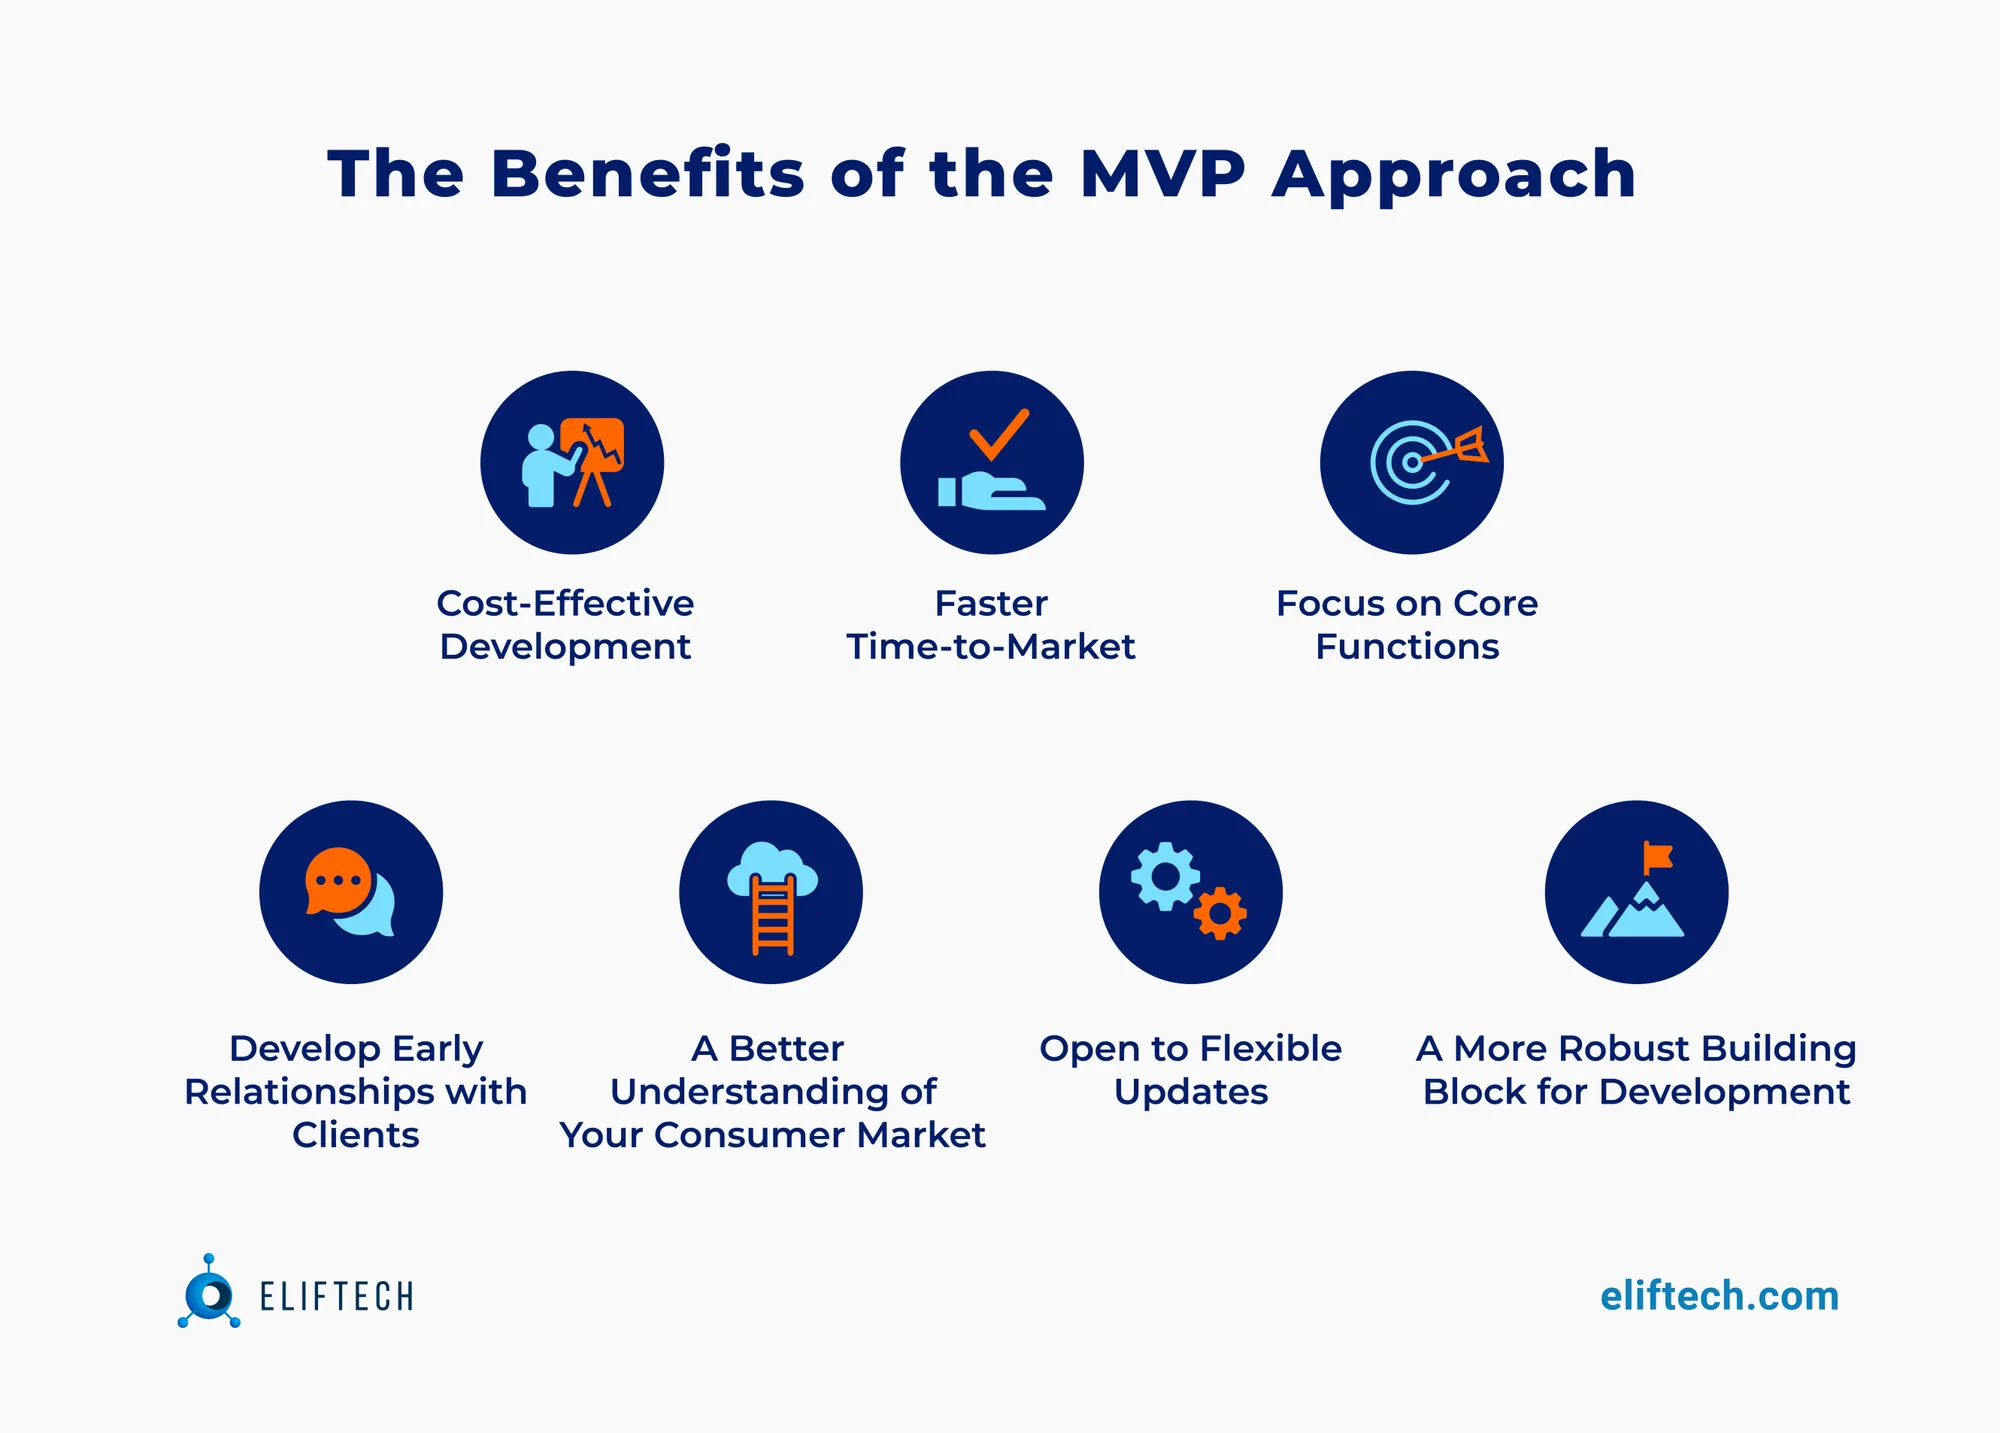 Benefits of the MVP approach